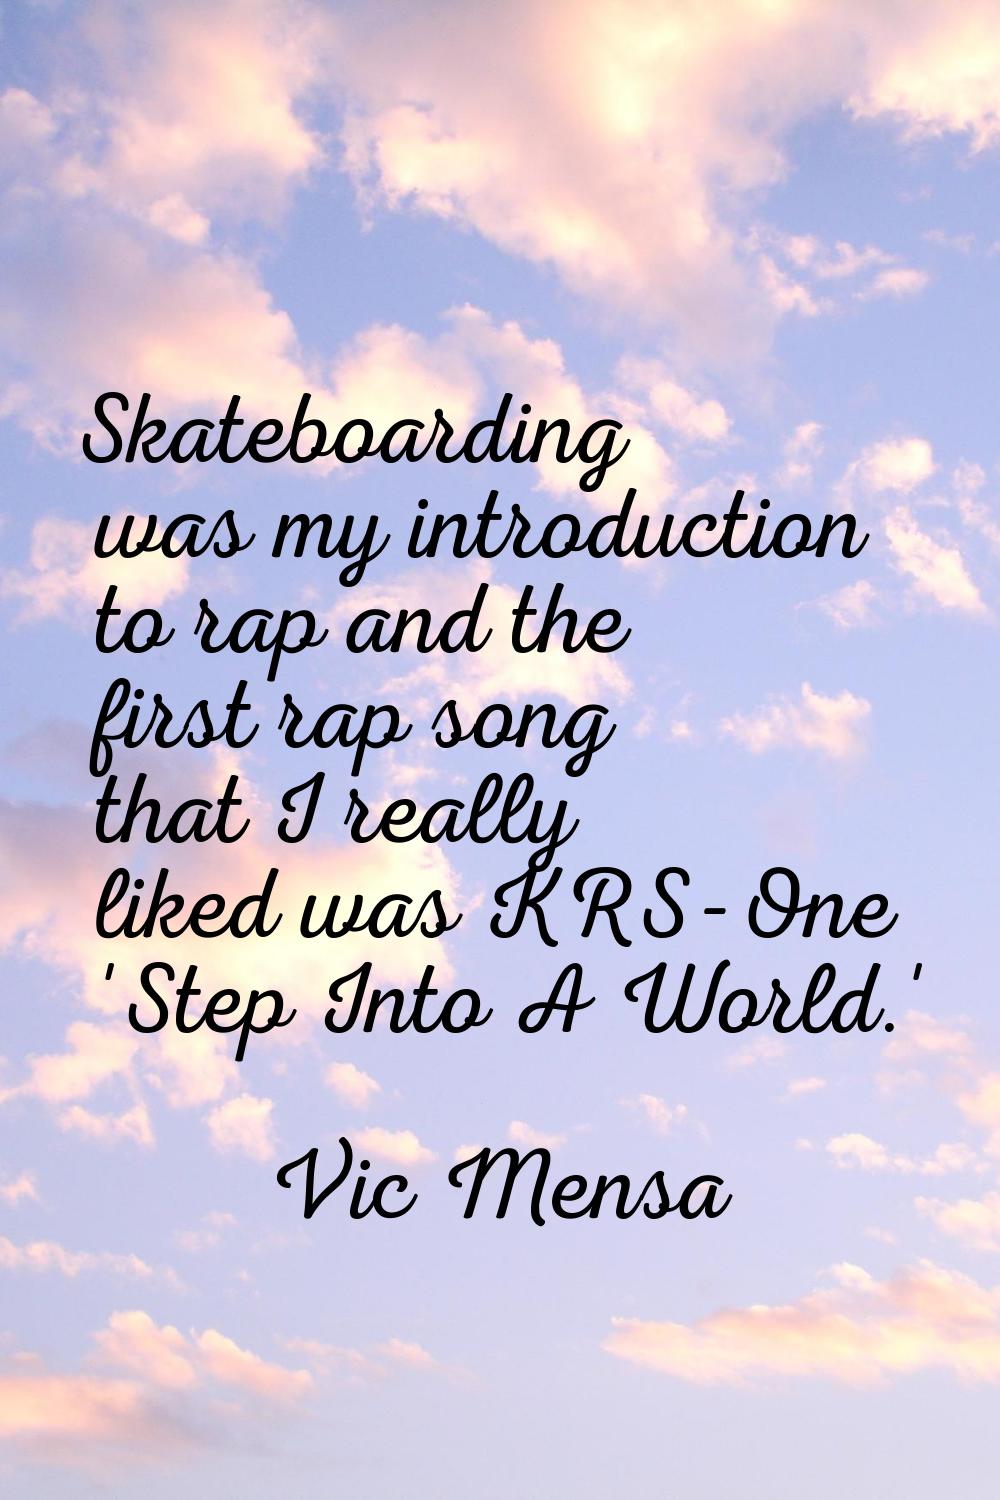 Skateboarding was my introduction to rap and the first rap song that I really liked was KRS-One 'St